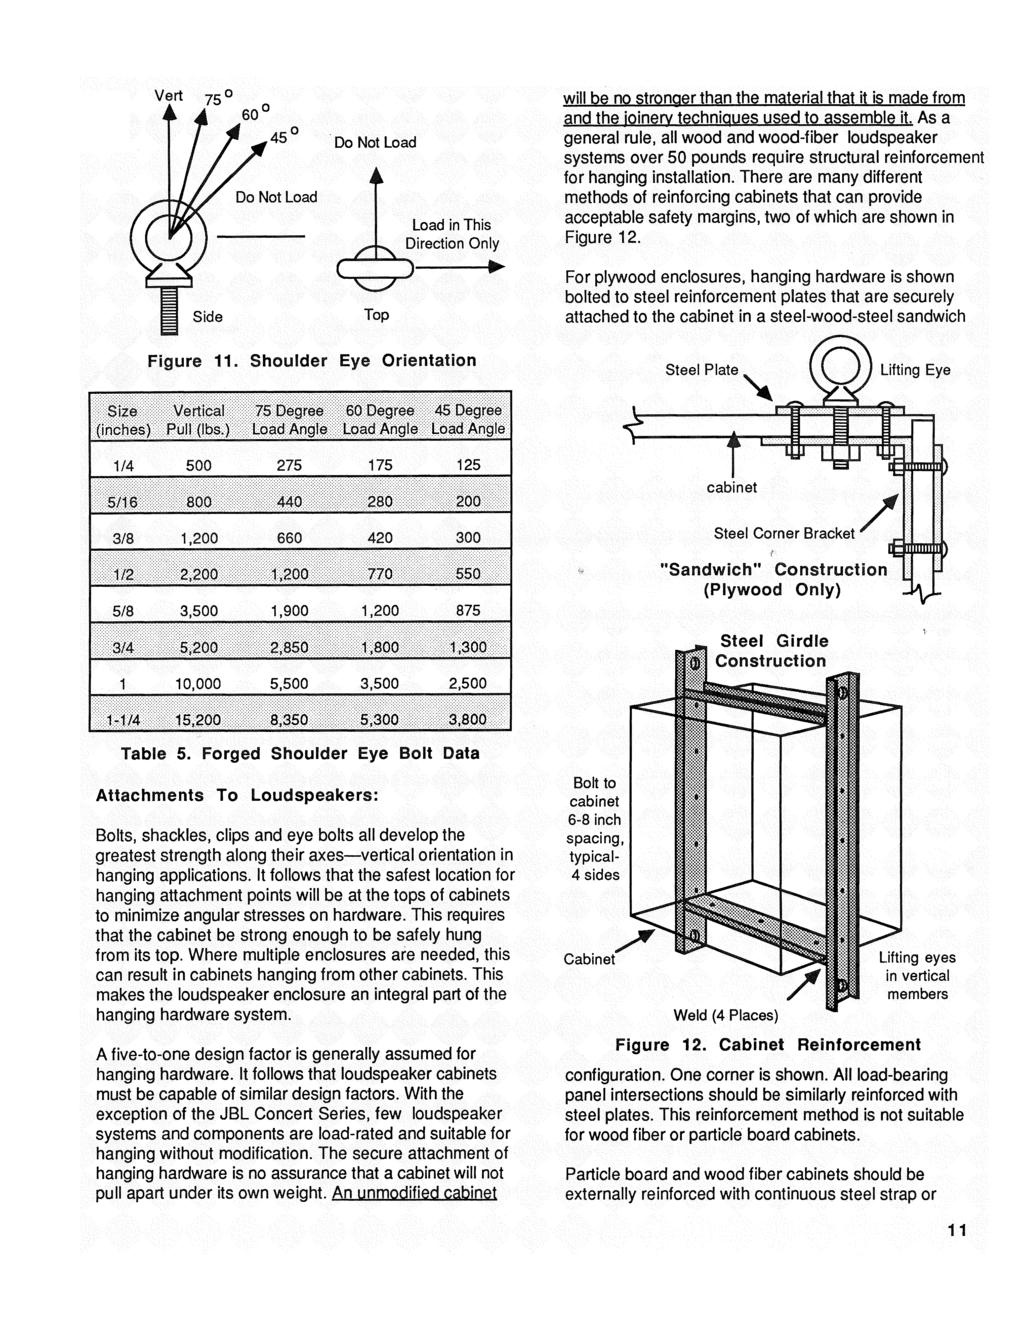 Vert 75 60 0 AH 45 Do Not Load Do Not Load Load in This Direction Only will be no stronger than the material that it is made from and the ioinerv techniques used to assemble it.